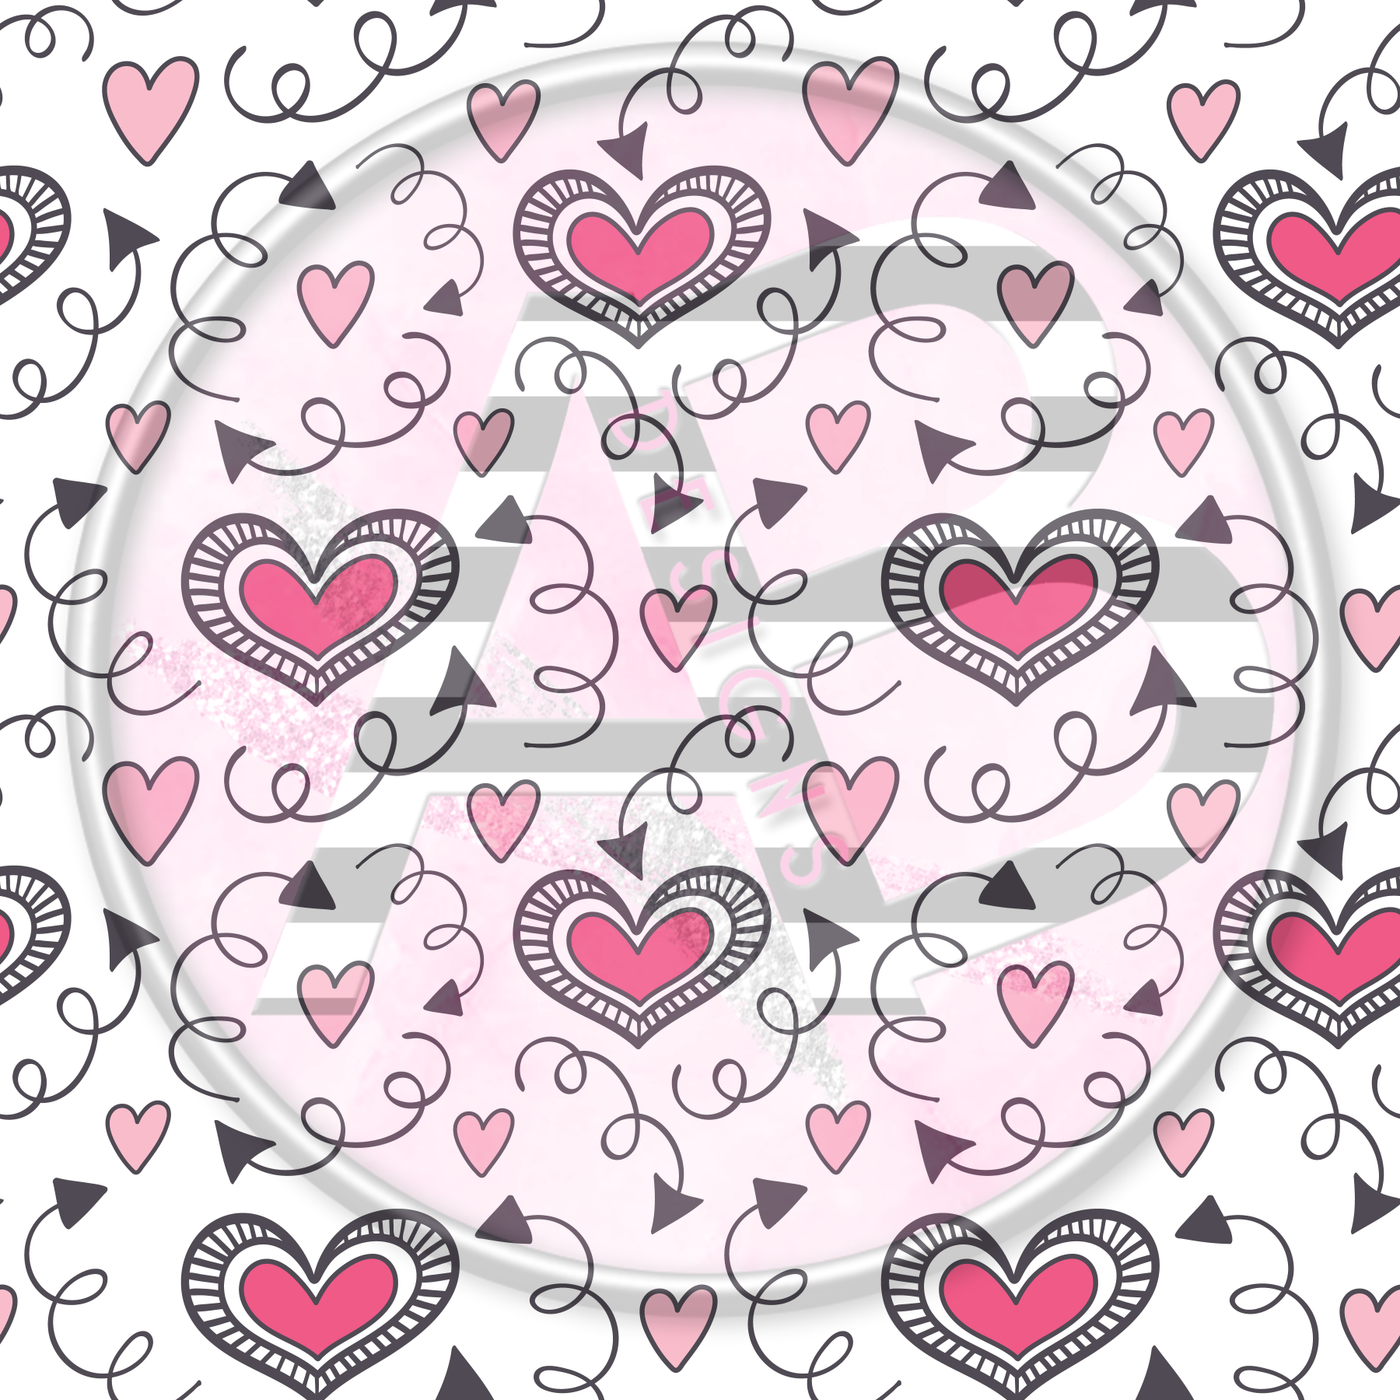 Adhesive Patterned Vinyl - Hearts 16